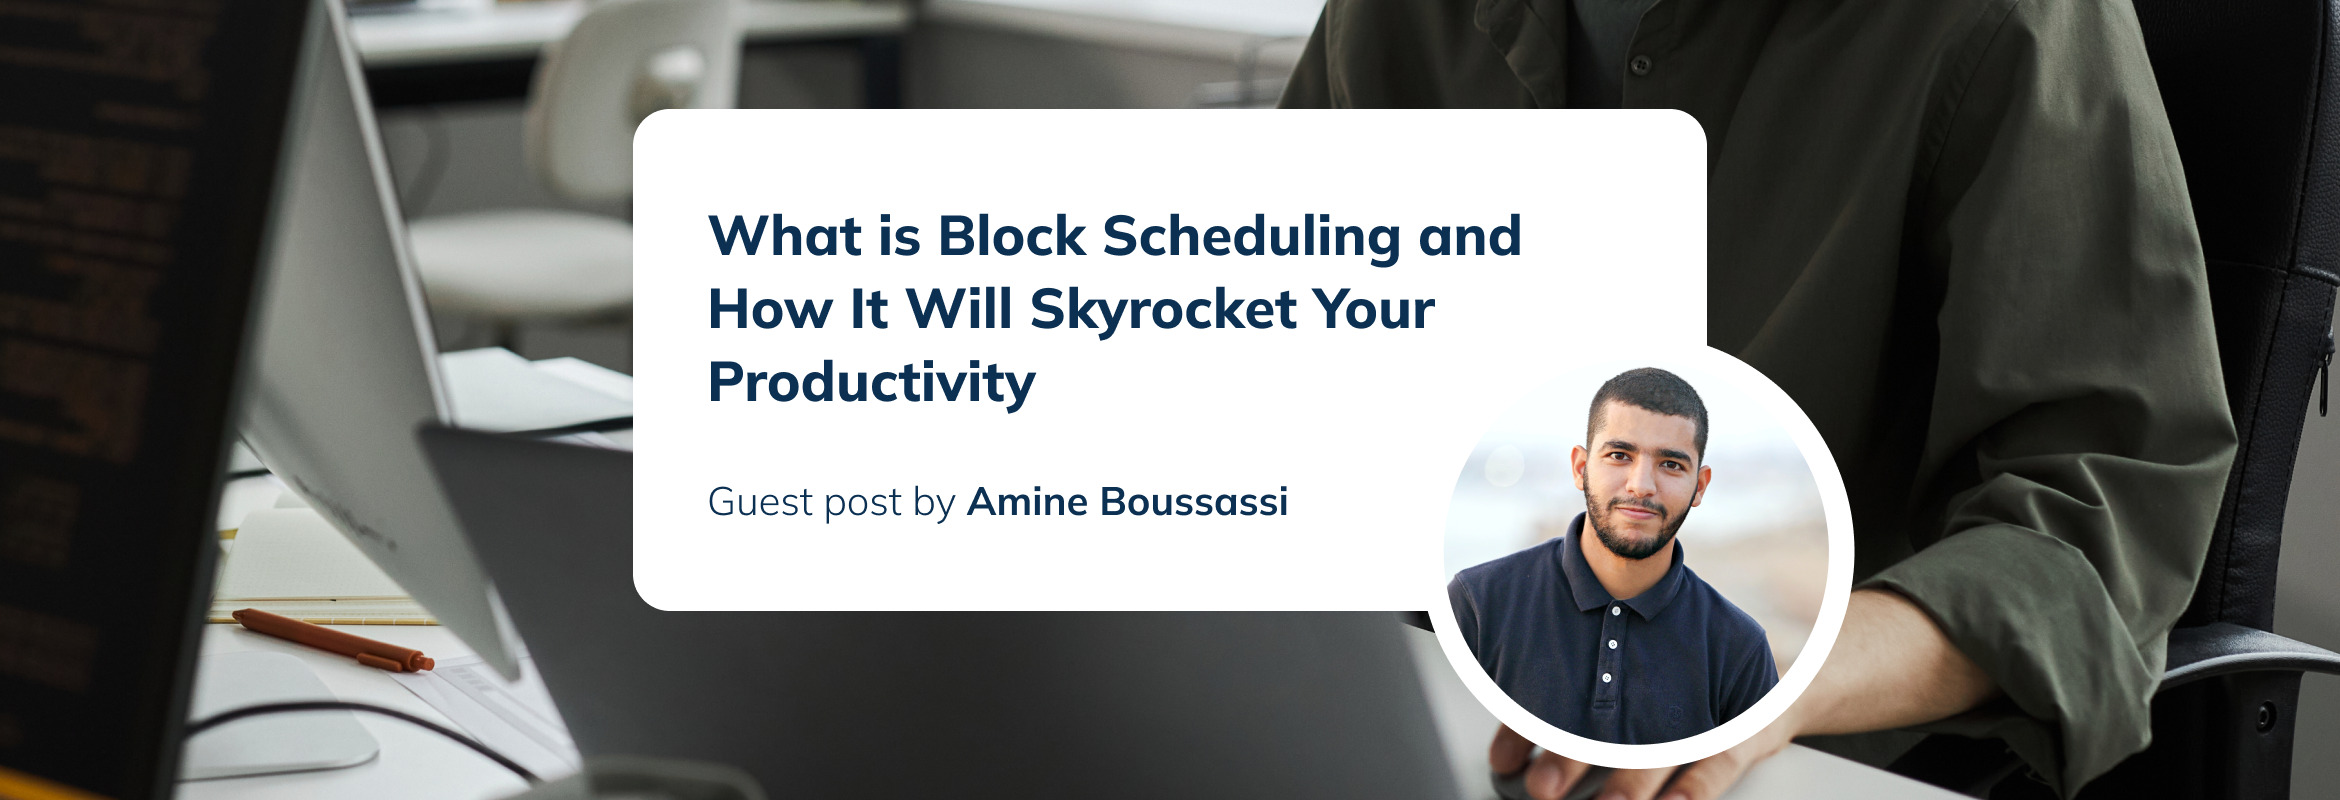 What is Block Scheduling and How It Will Skyrocket Your Productivity